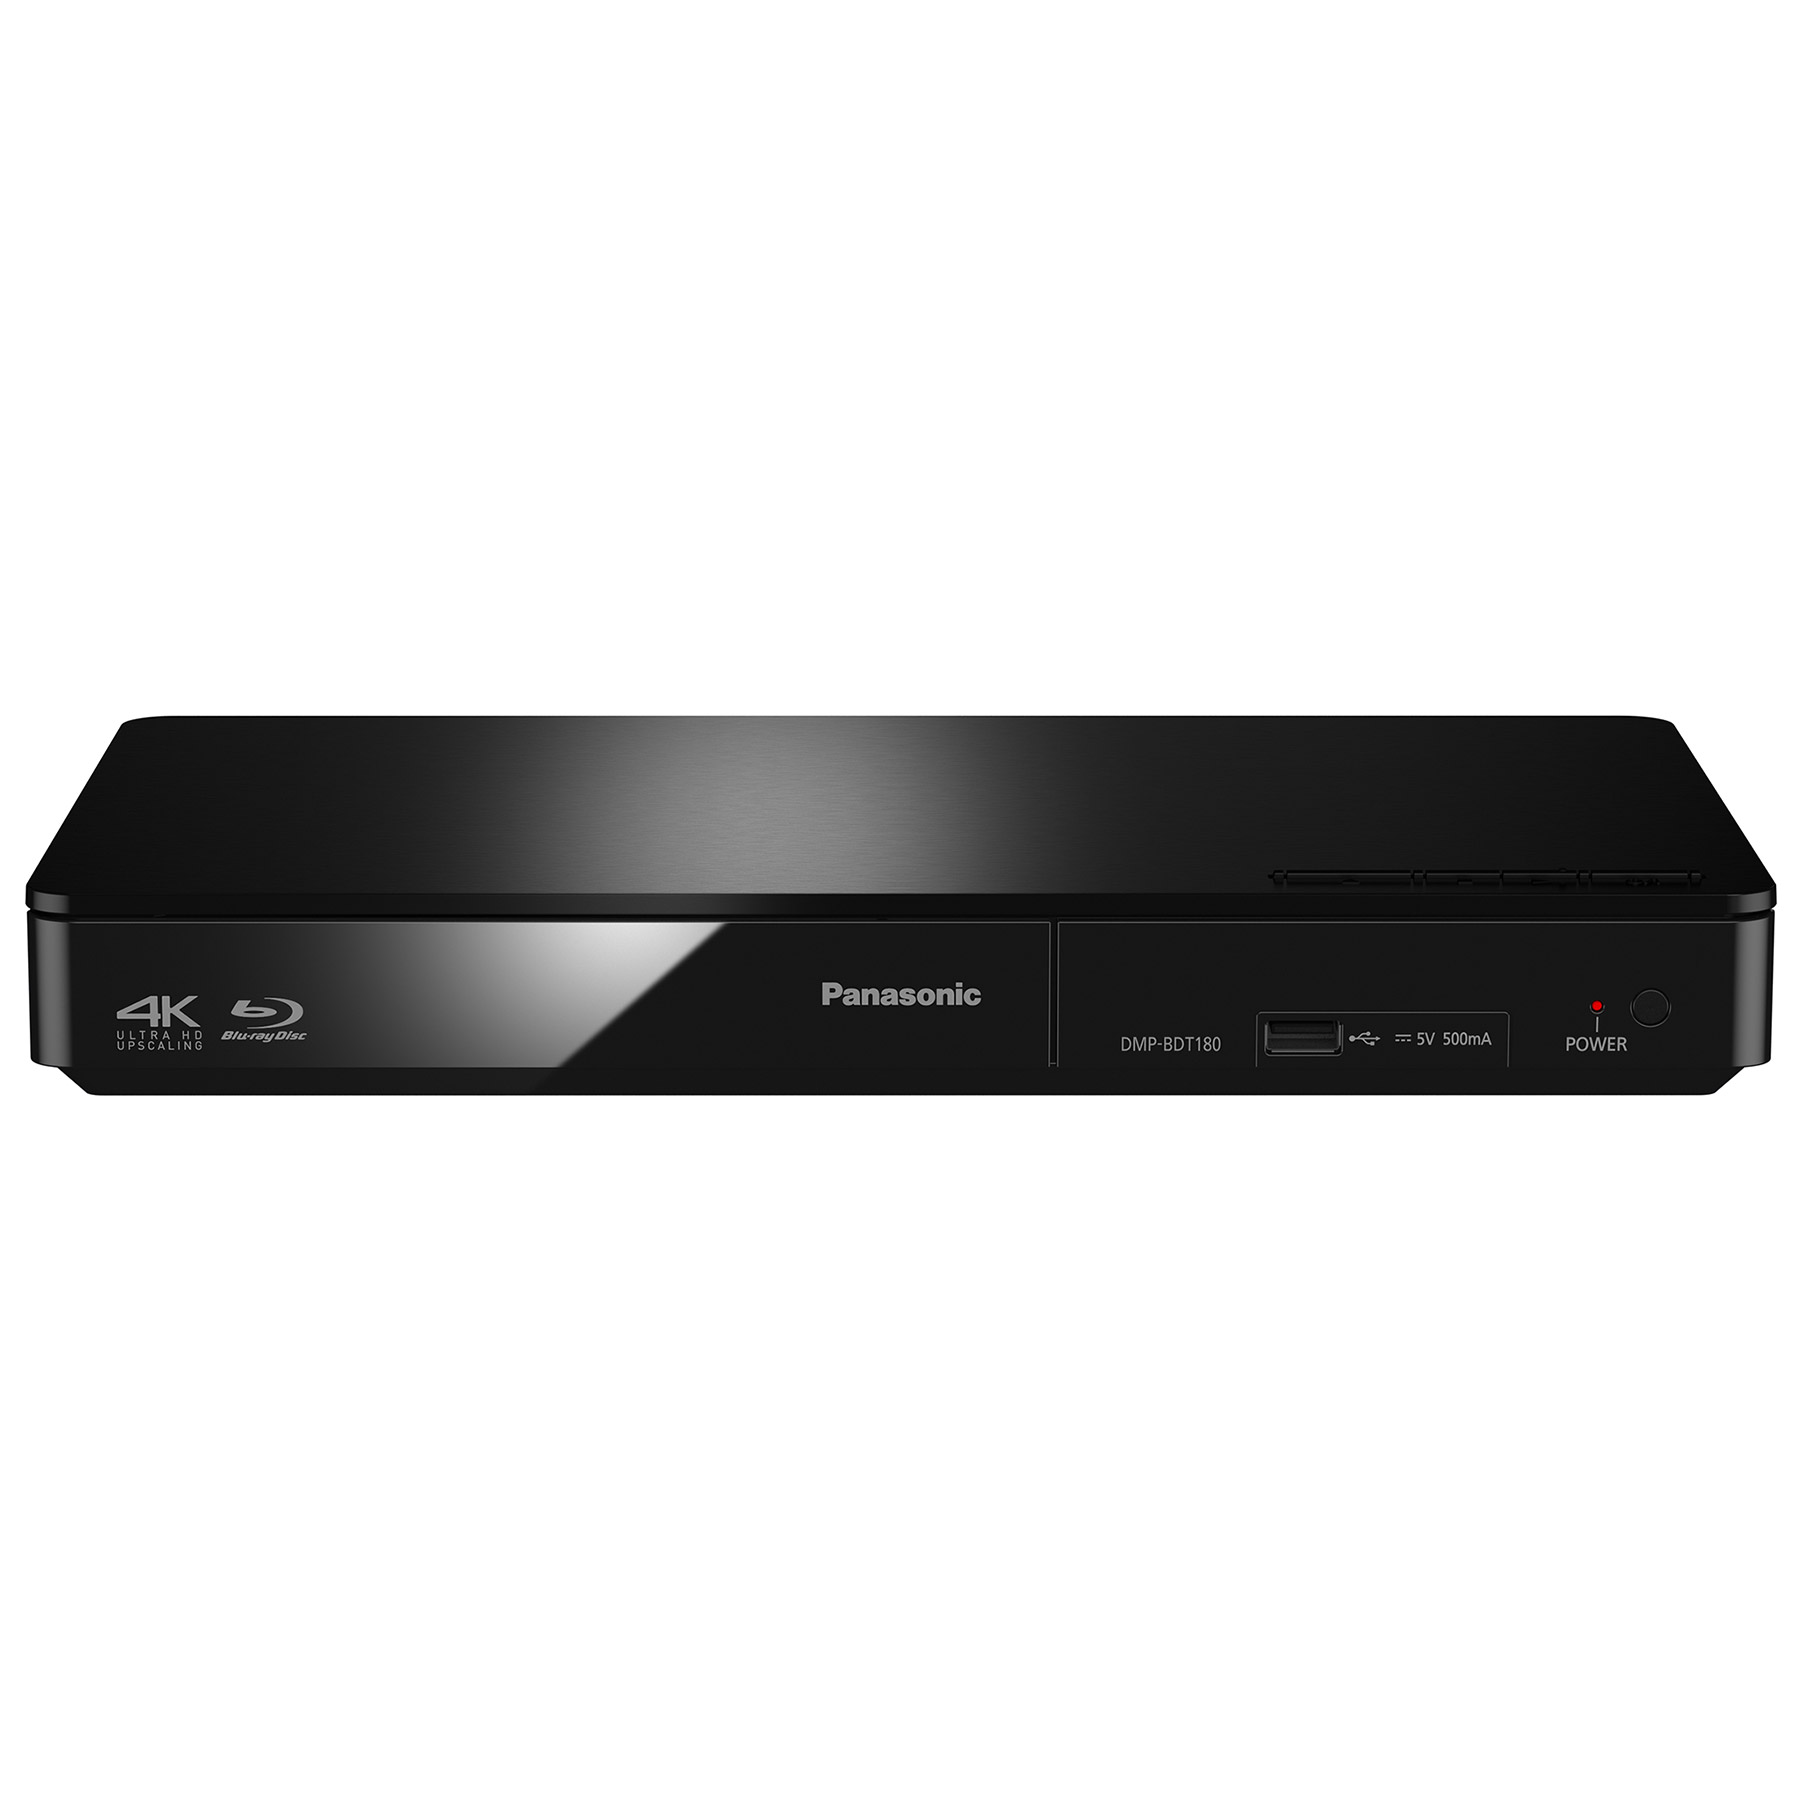 Image of Panasonic DMPBDT180EB 3D Blu Ray Player Full HD with 4K Upscale Smart